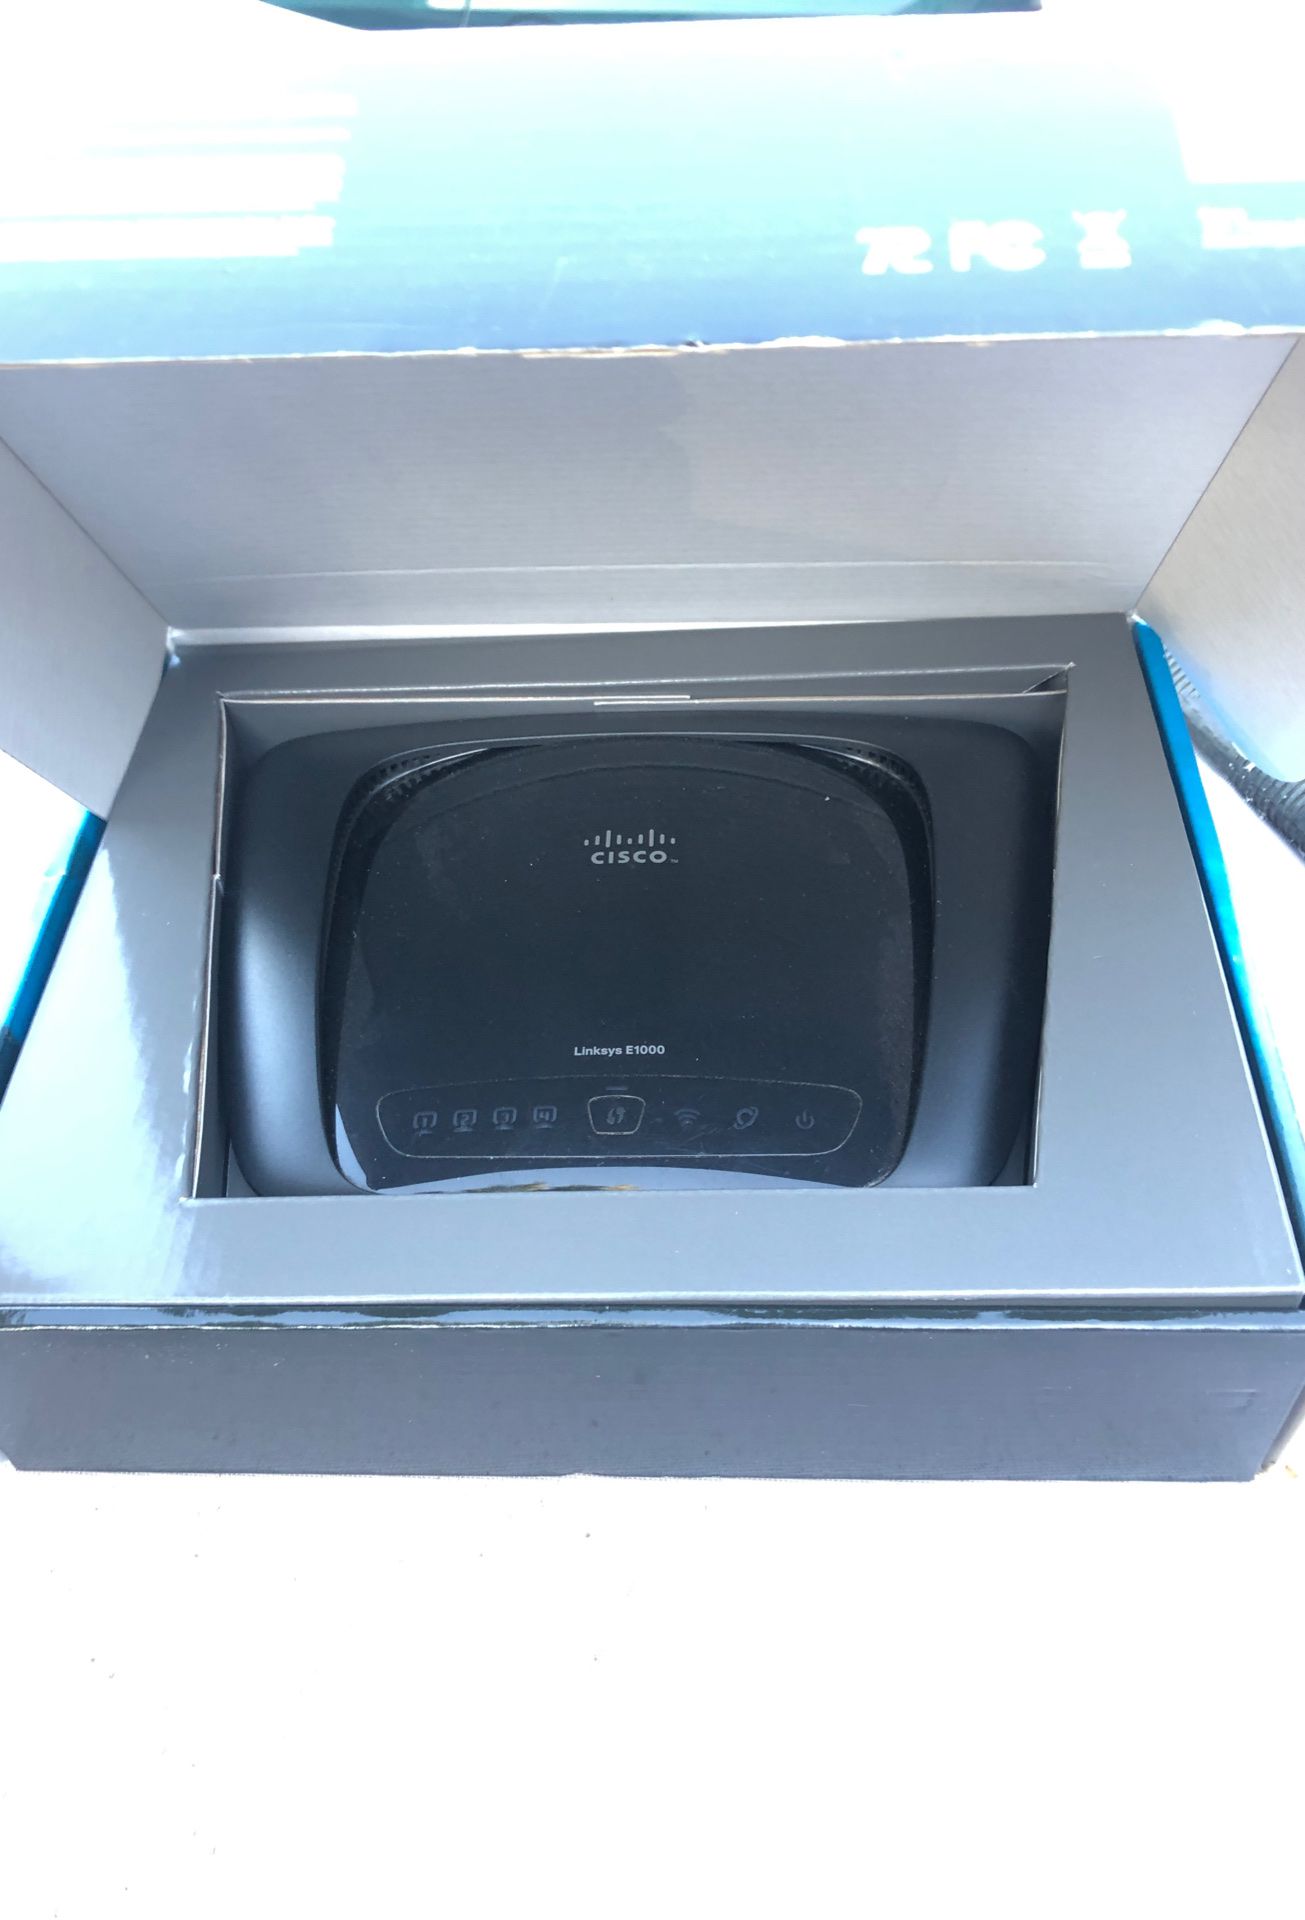 Linksys E1000 wireless-n router